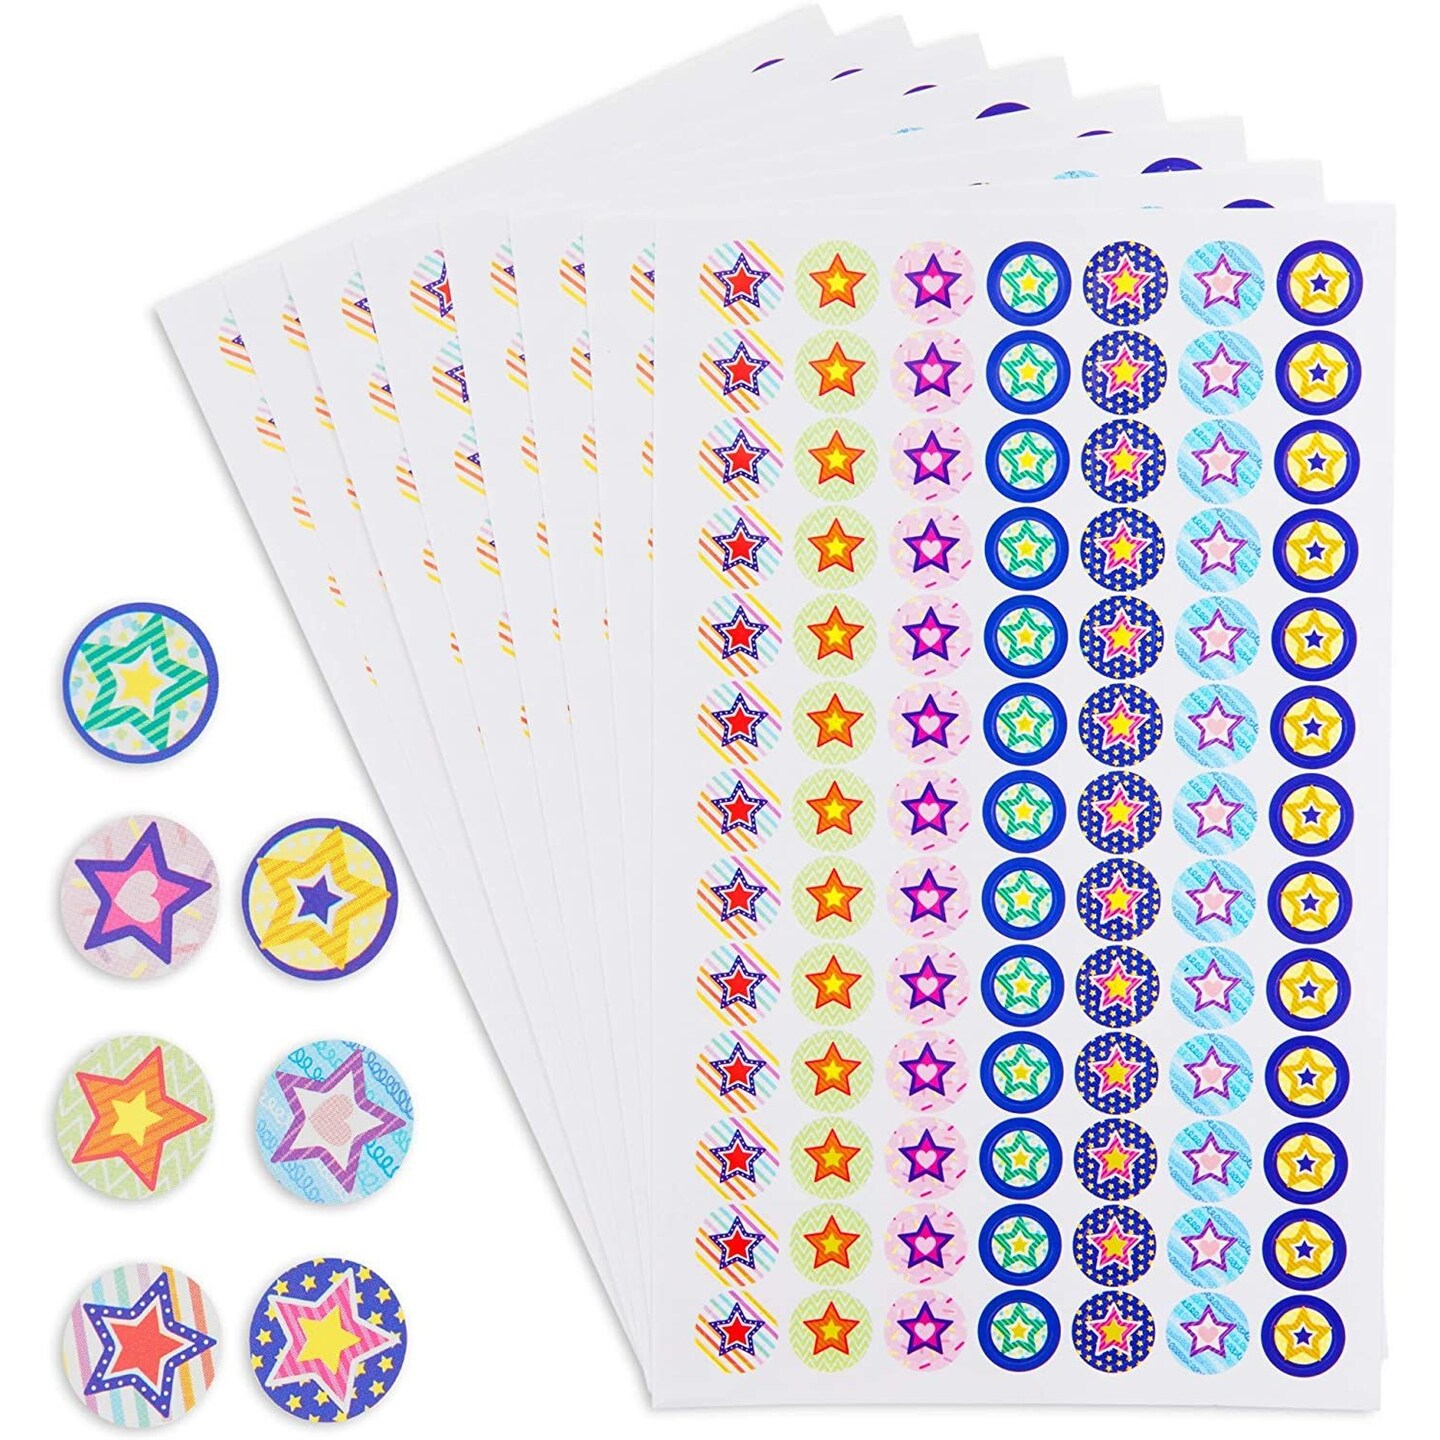 12 Packs: 120 ct. (1,440 total) Star Foam Stickers by Creatology™ 